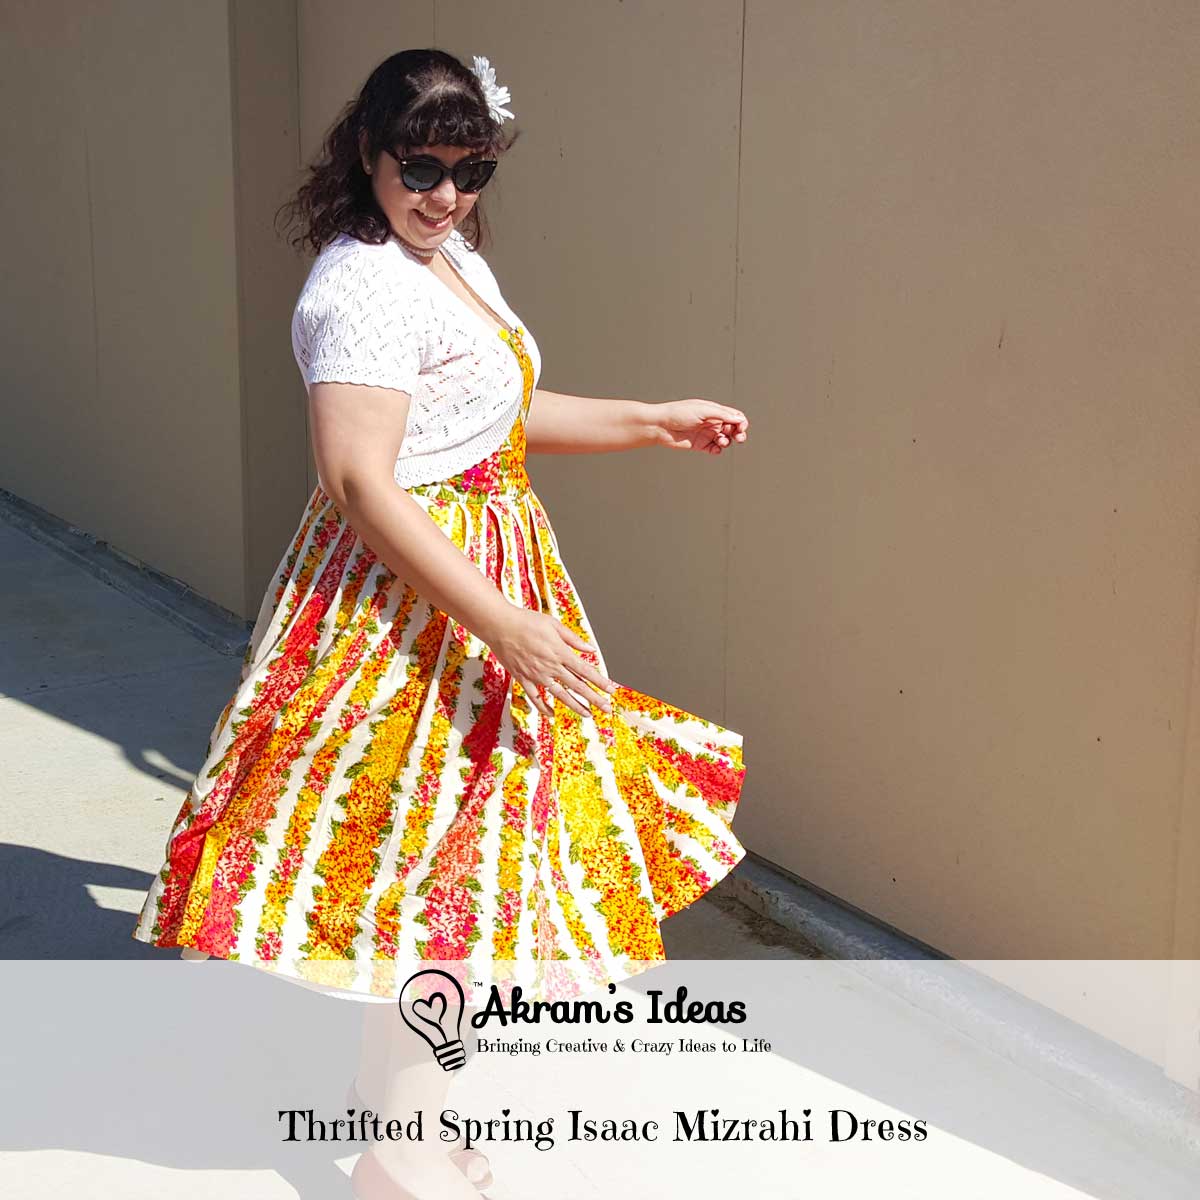 Sharing my lovely newly thrifted Isaac Mizrahi dress which is perfect for spring.